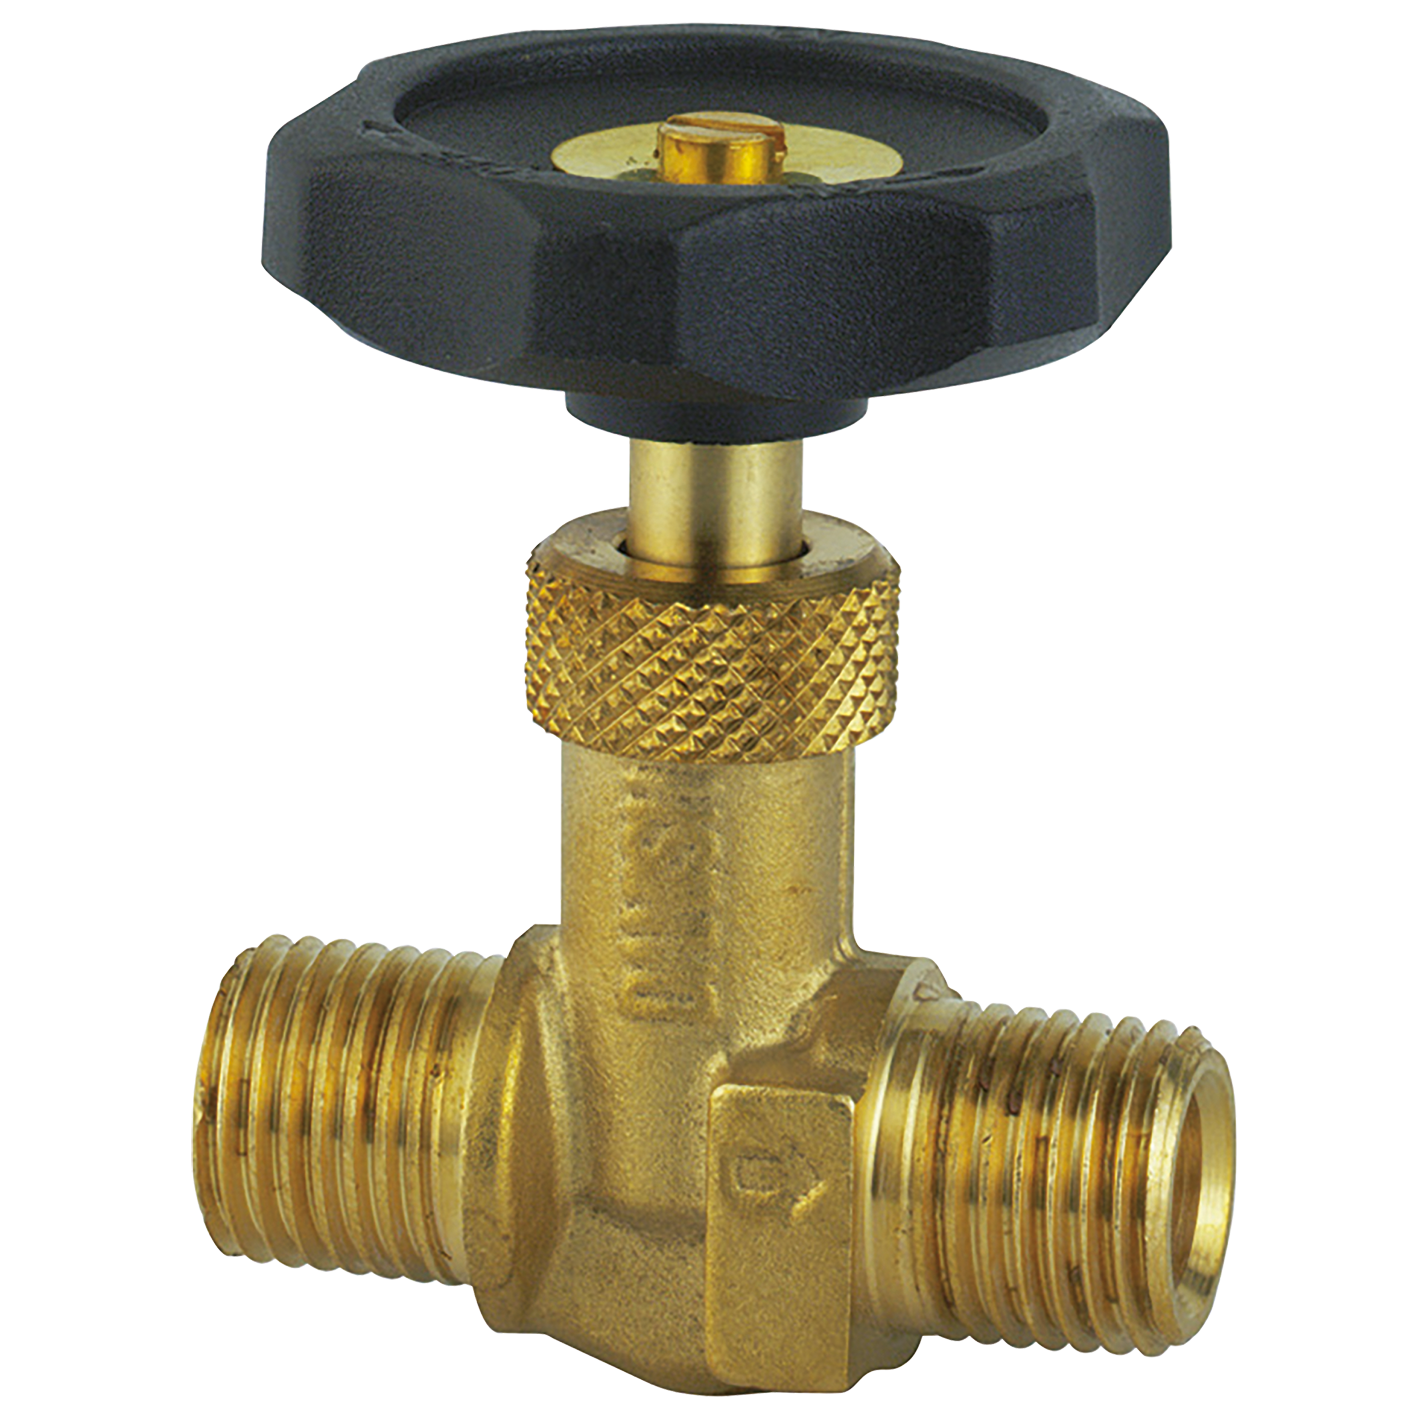 1/2" BSPT EQUAL MALE BRASS NEEDLE VALVE